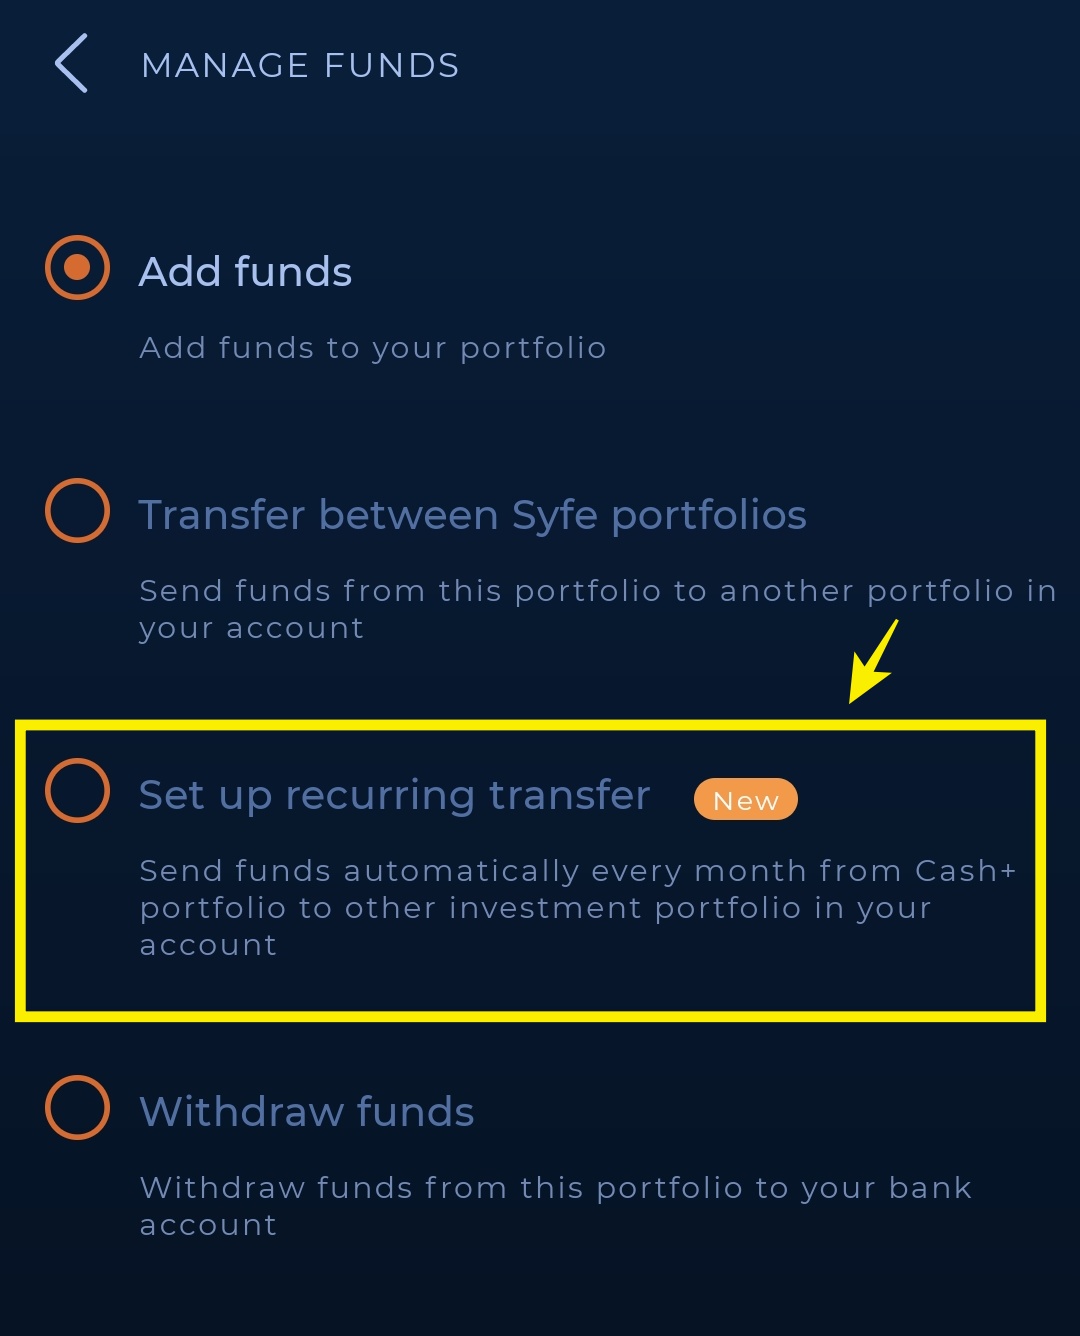 Use Cash+ to automate recurring transfer 